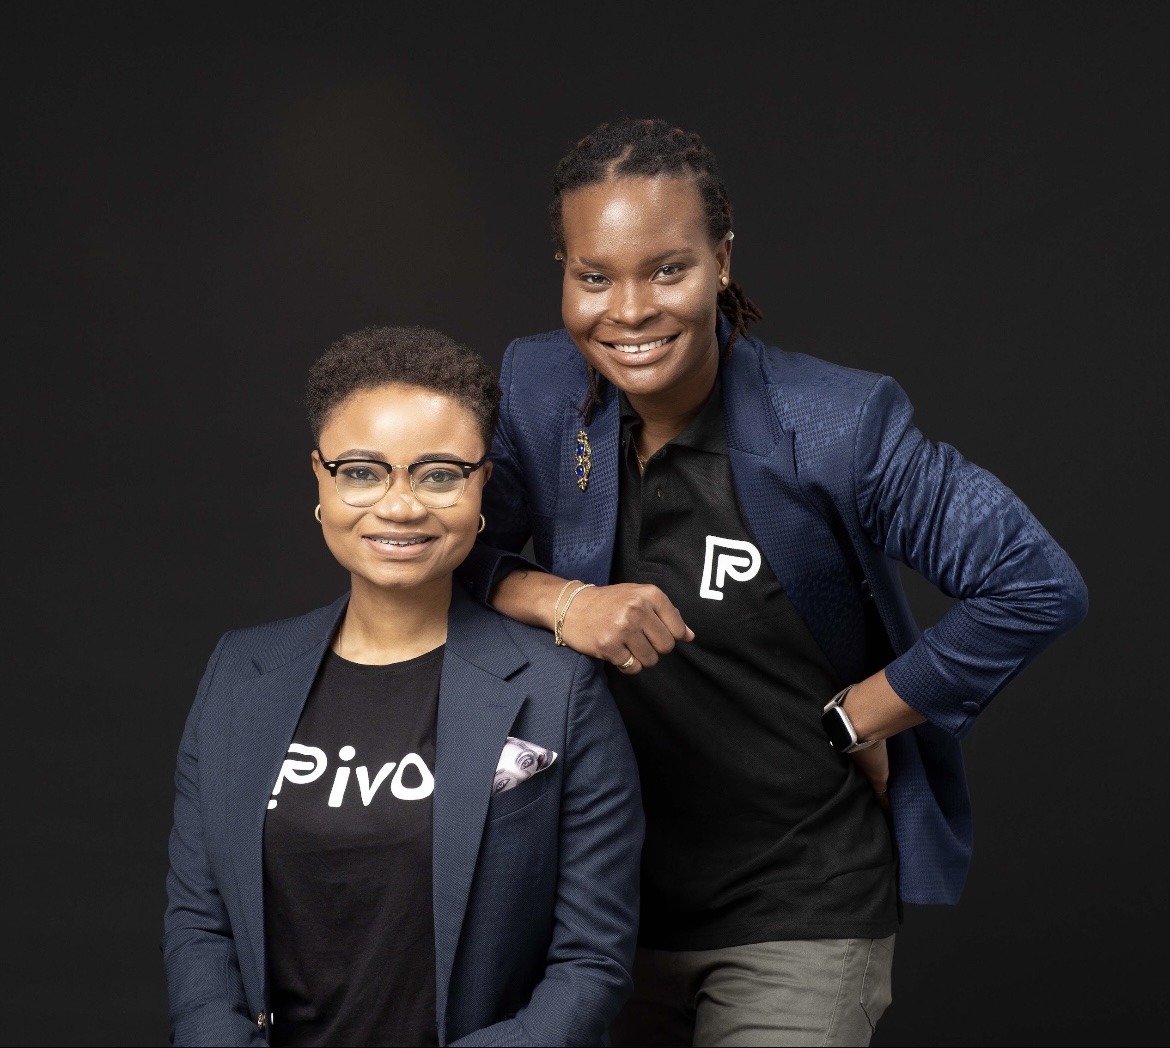 Pivo powers up Nigerian freight carriers with a bespoke digital bank, gets $2M seed funding - TechCrunch